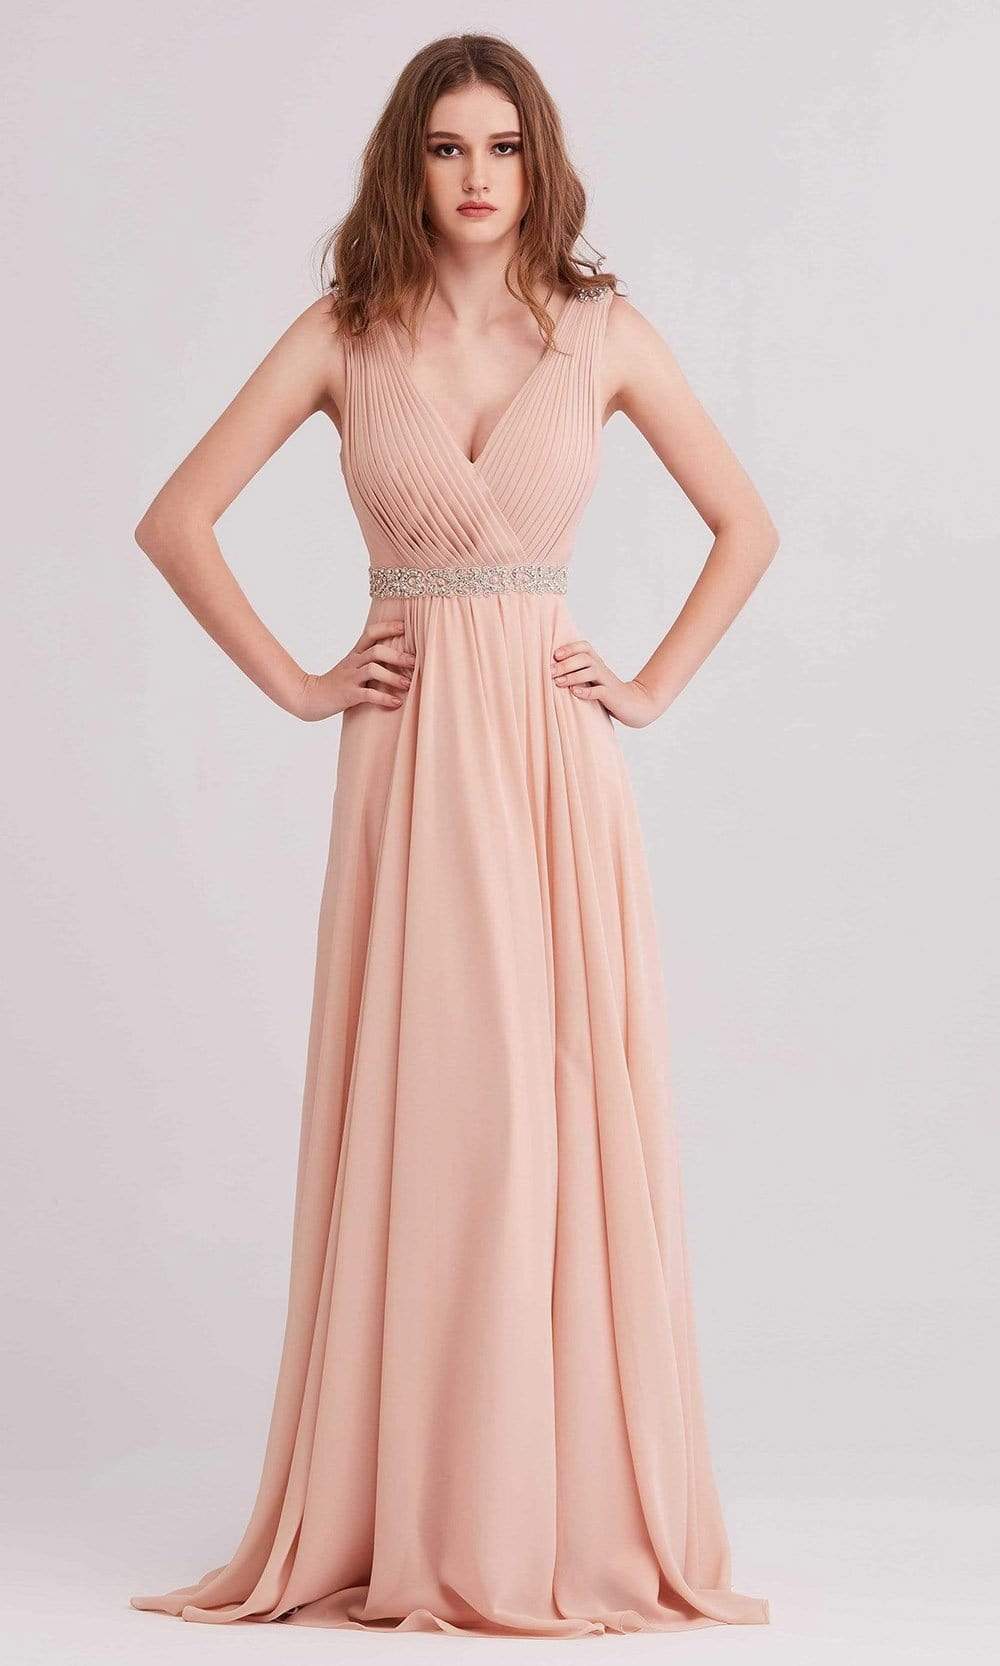 Image of J'Adore Dresses - J15002 Pleated V Neck Beaded Chiffon A-line Gown